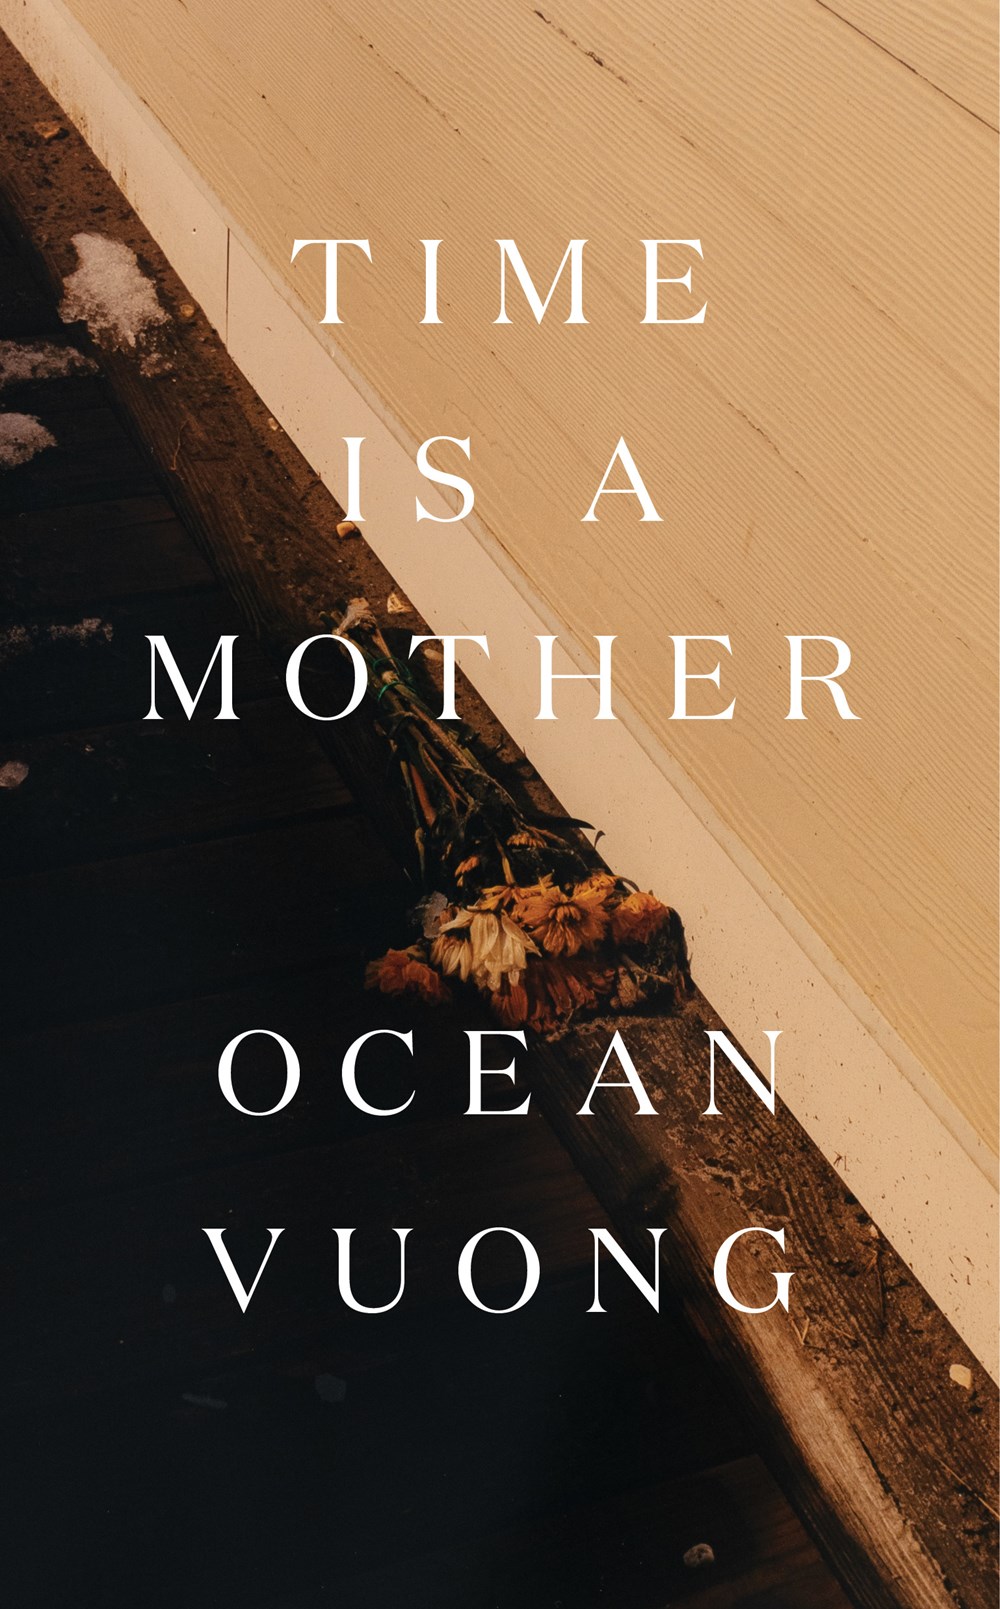 Image for "Time Is a Mother"